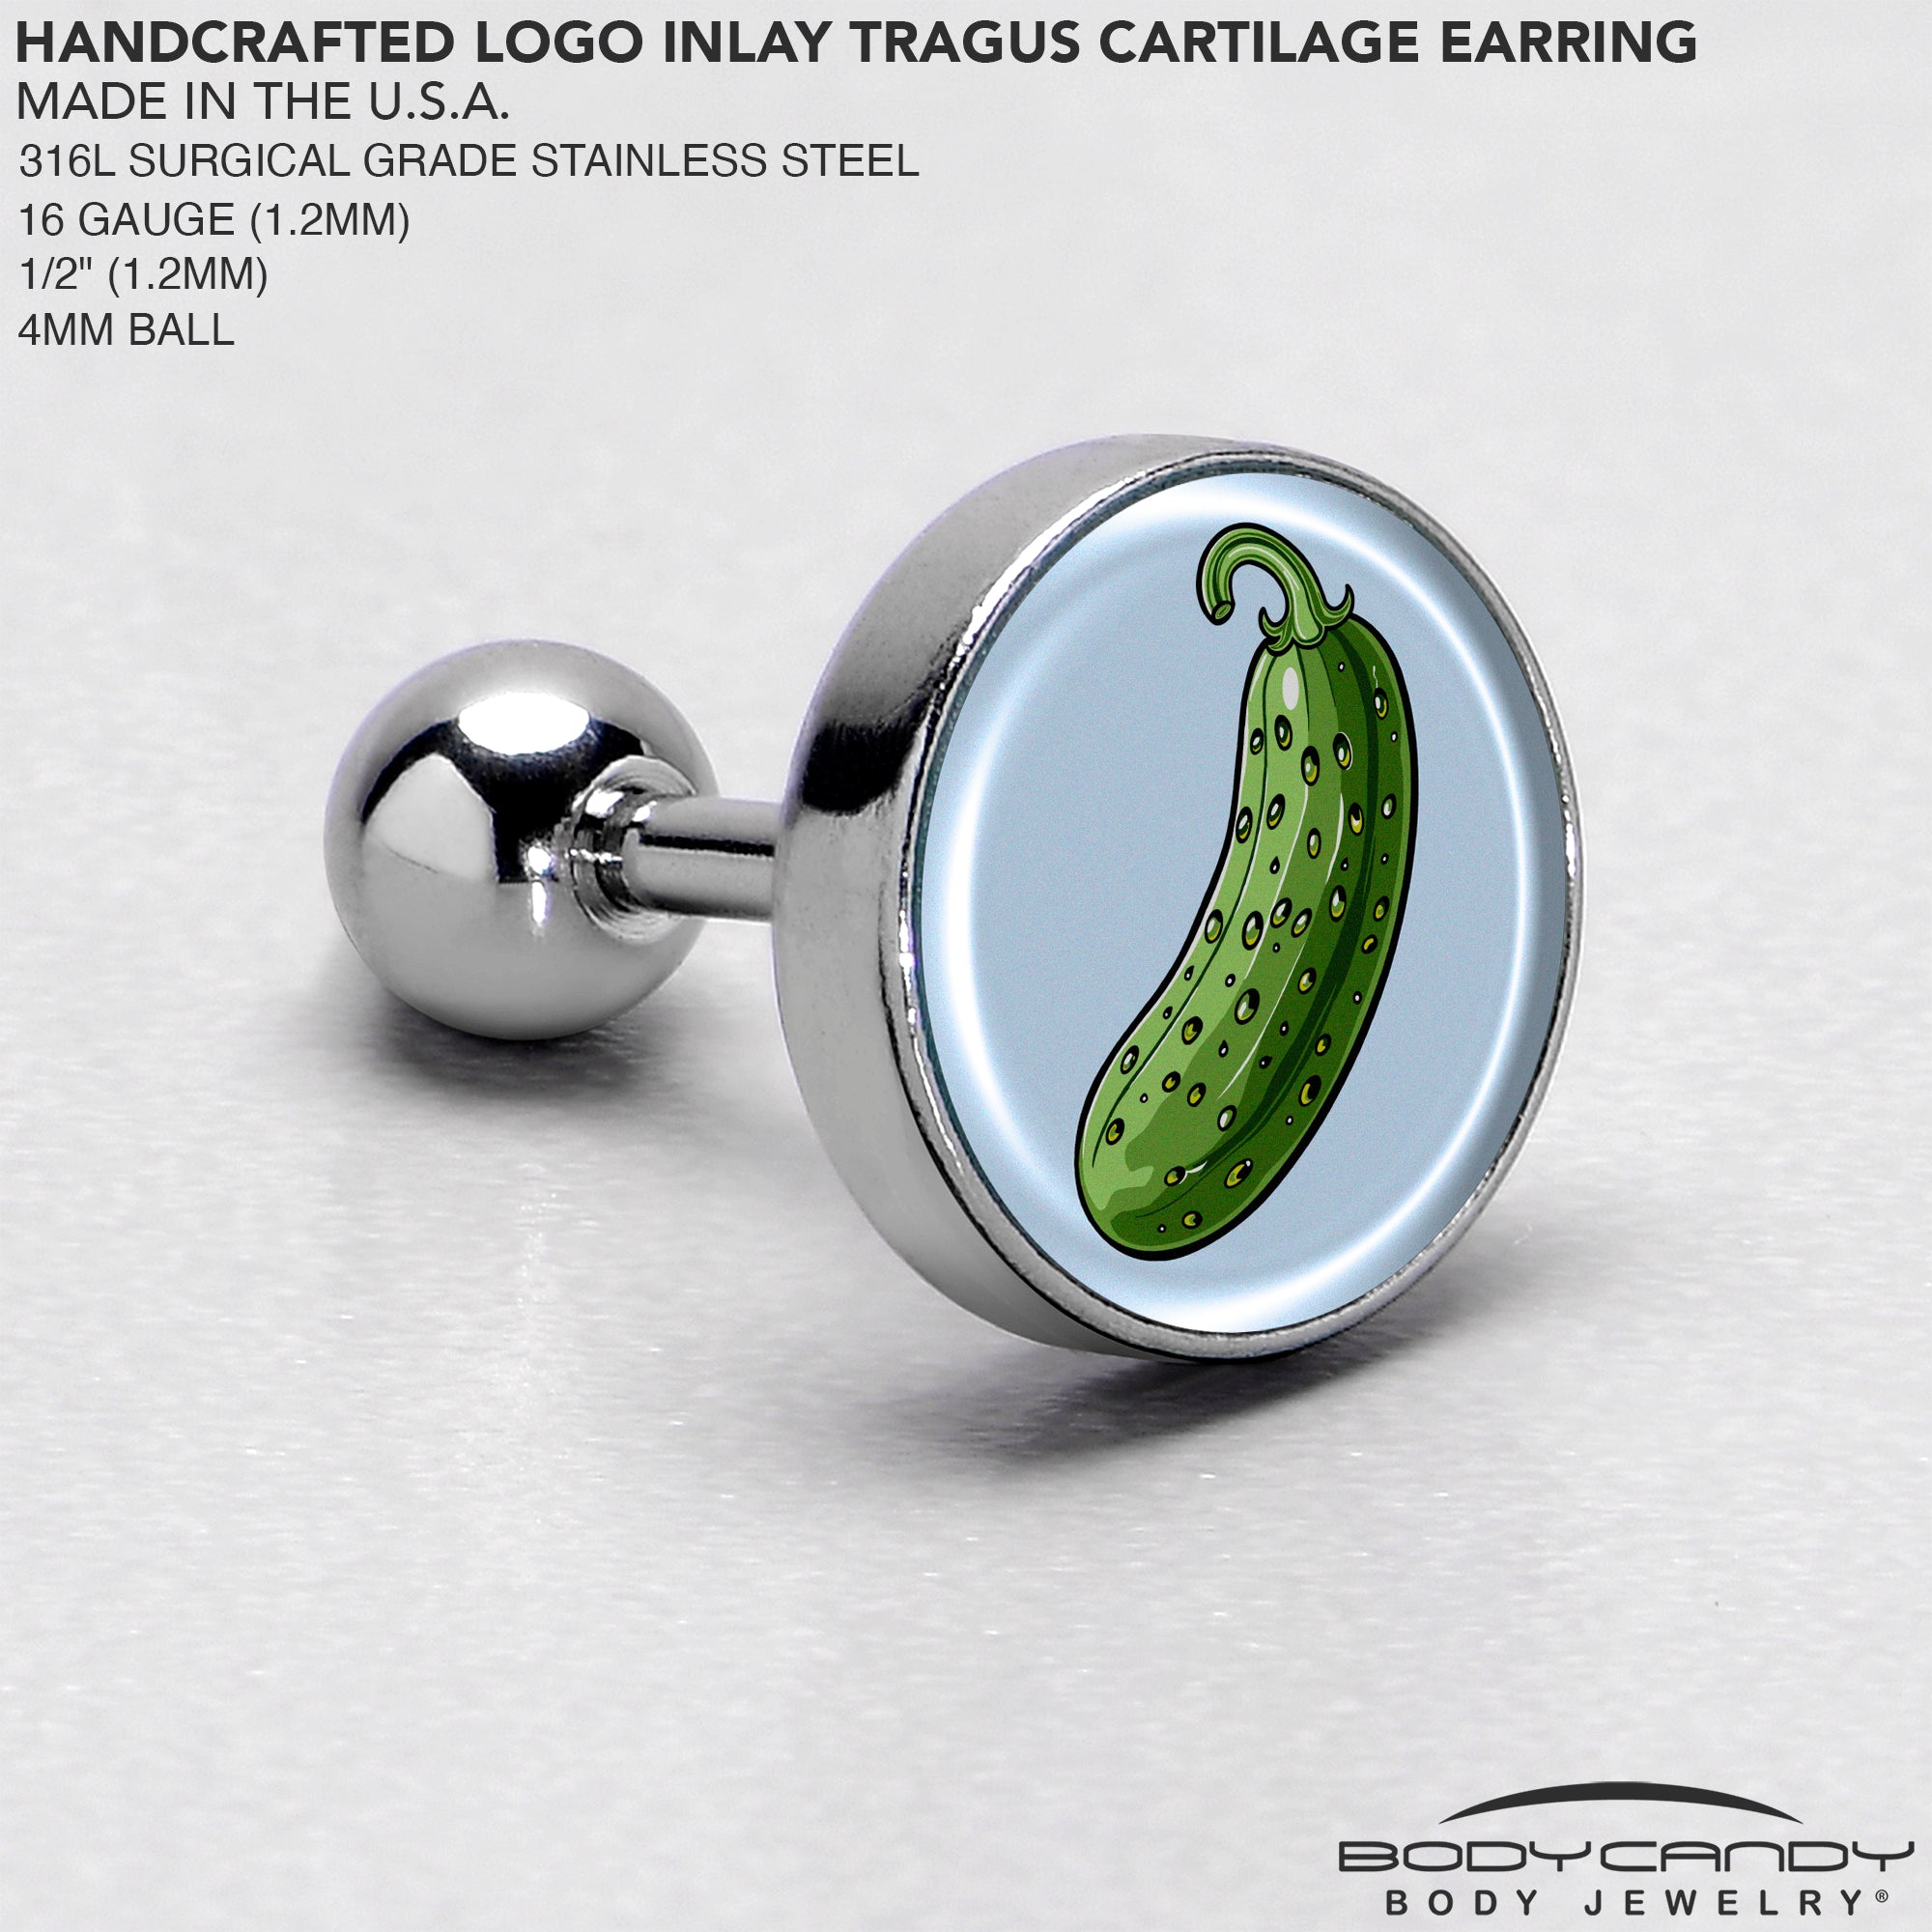 Green Pickle Tragus Cartilage Earring